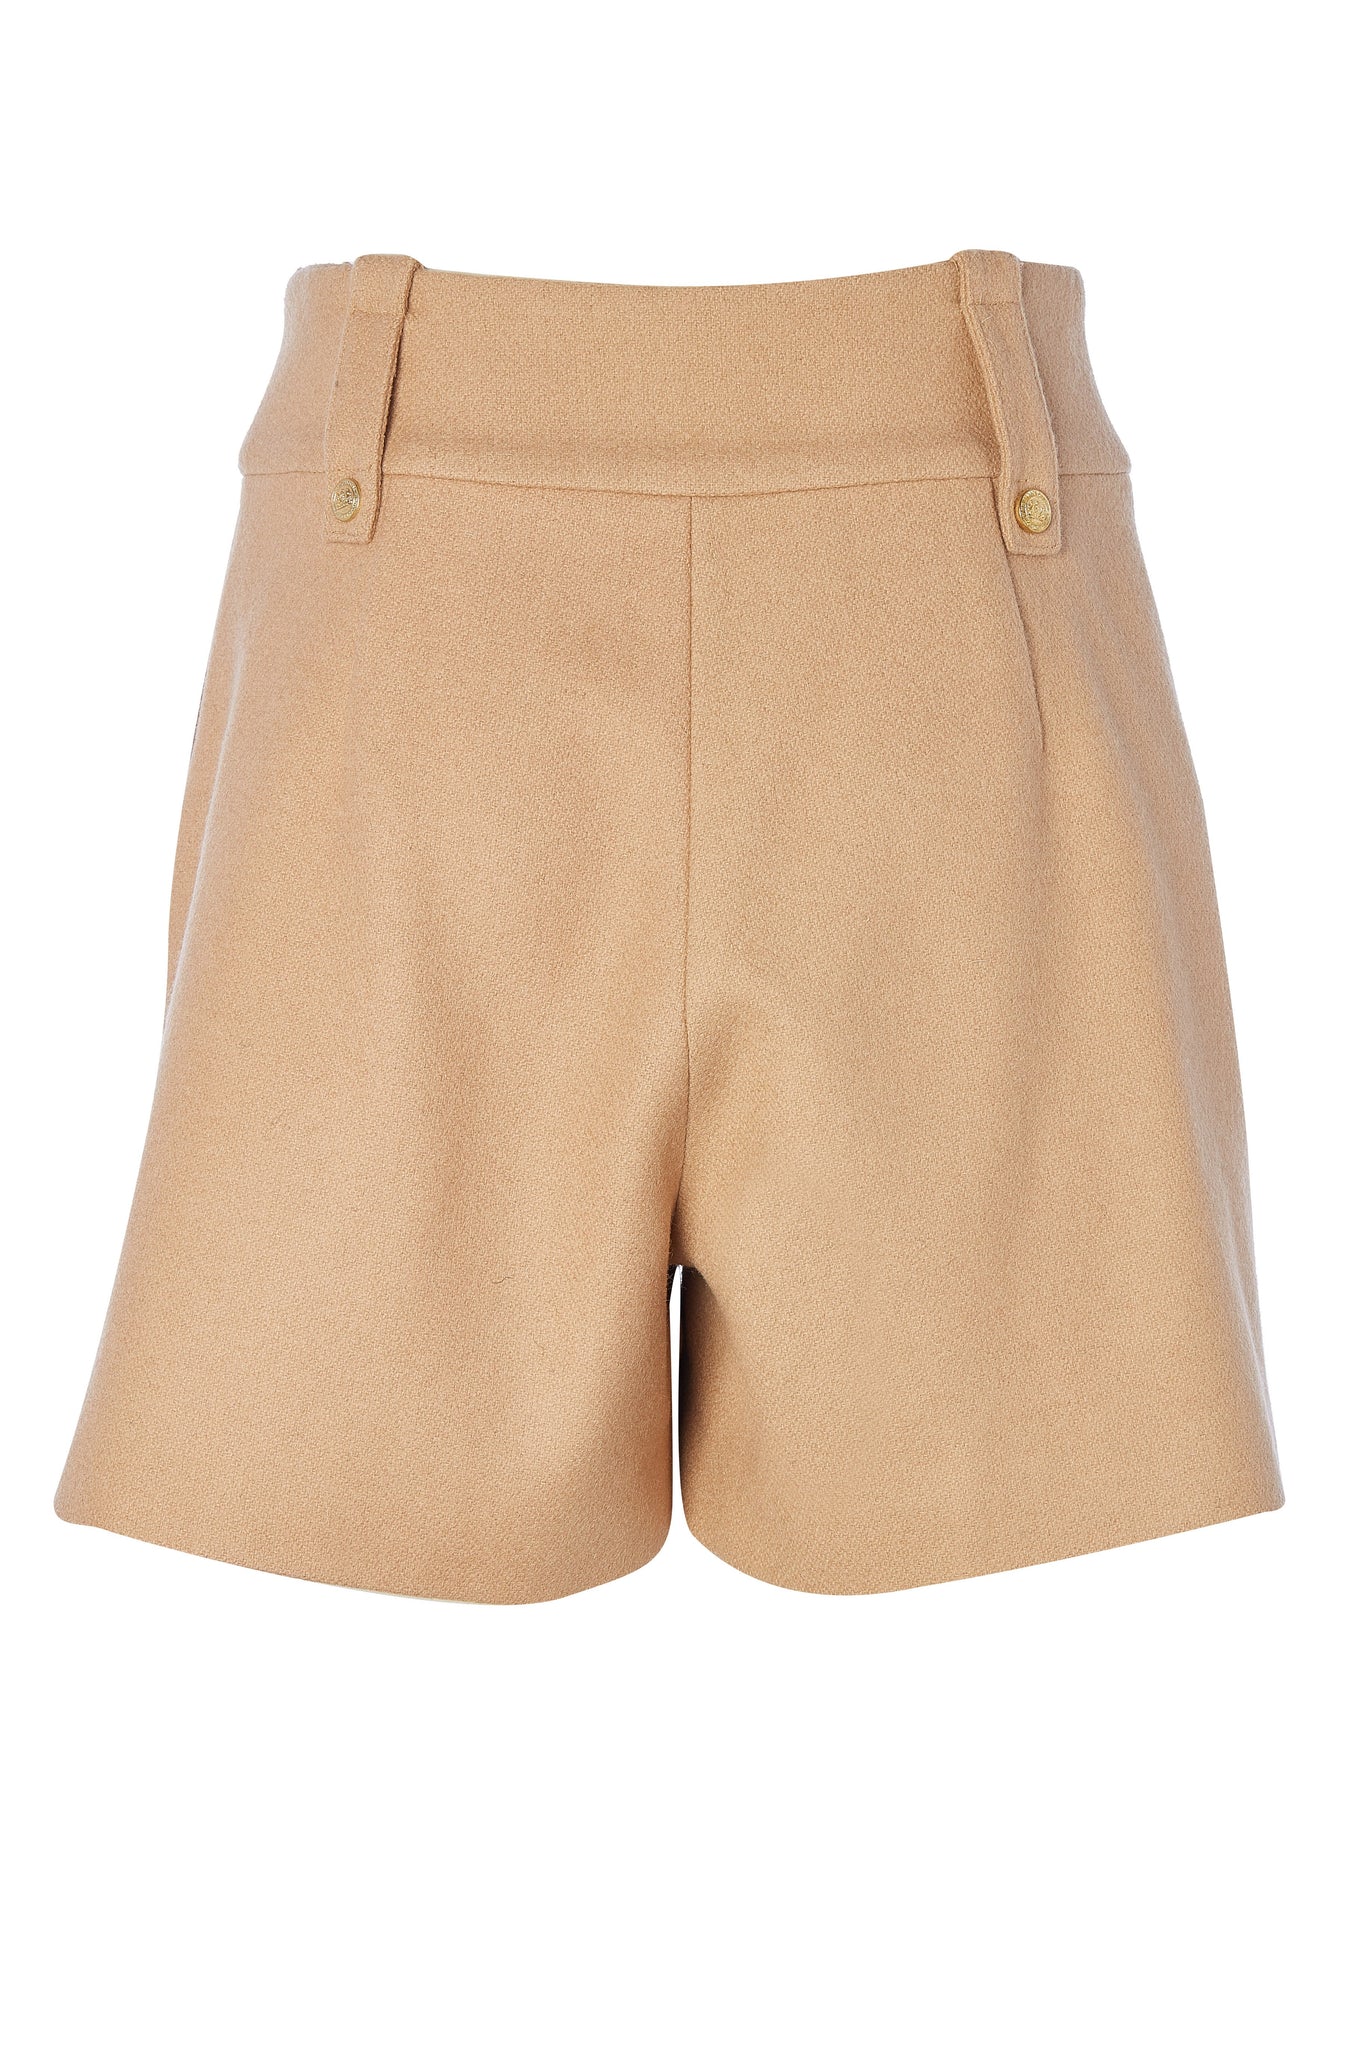 back of womens camel high rise tailored shorts with two single knife pleats and centre front zip fly fastening with twin branded gold stud buttons and side hip pockets with branded rivet detailing at top and bottom of pockets